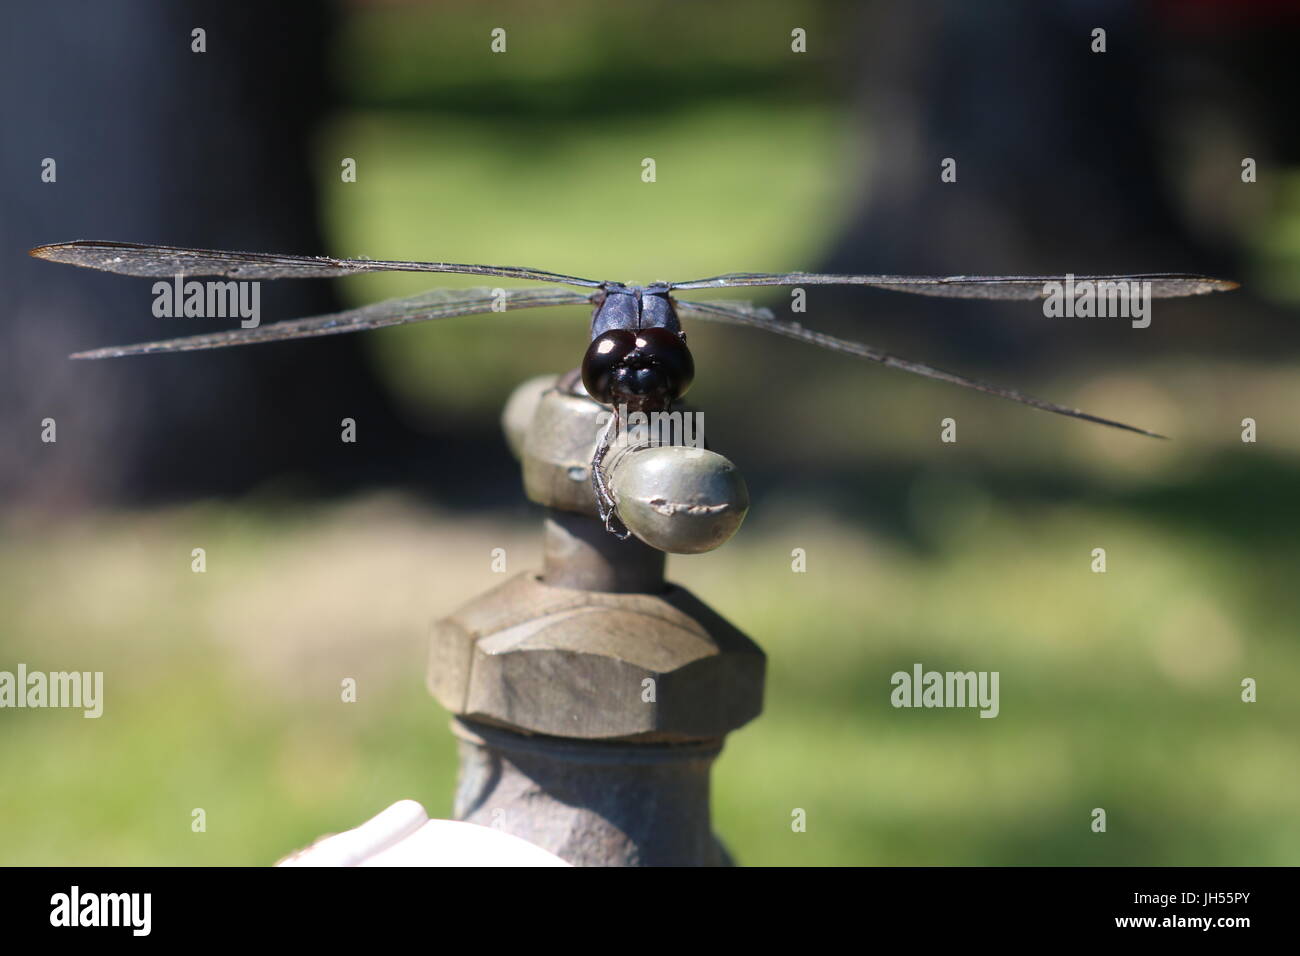 Close up of a full frontal black and blue dragonfly on an outdoor faucet in Texas Stock Photo